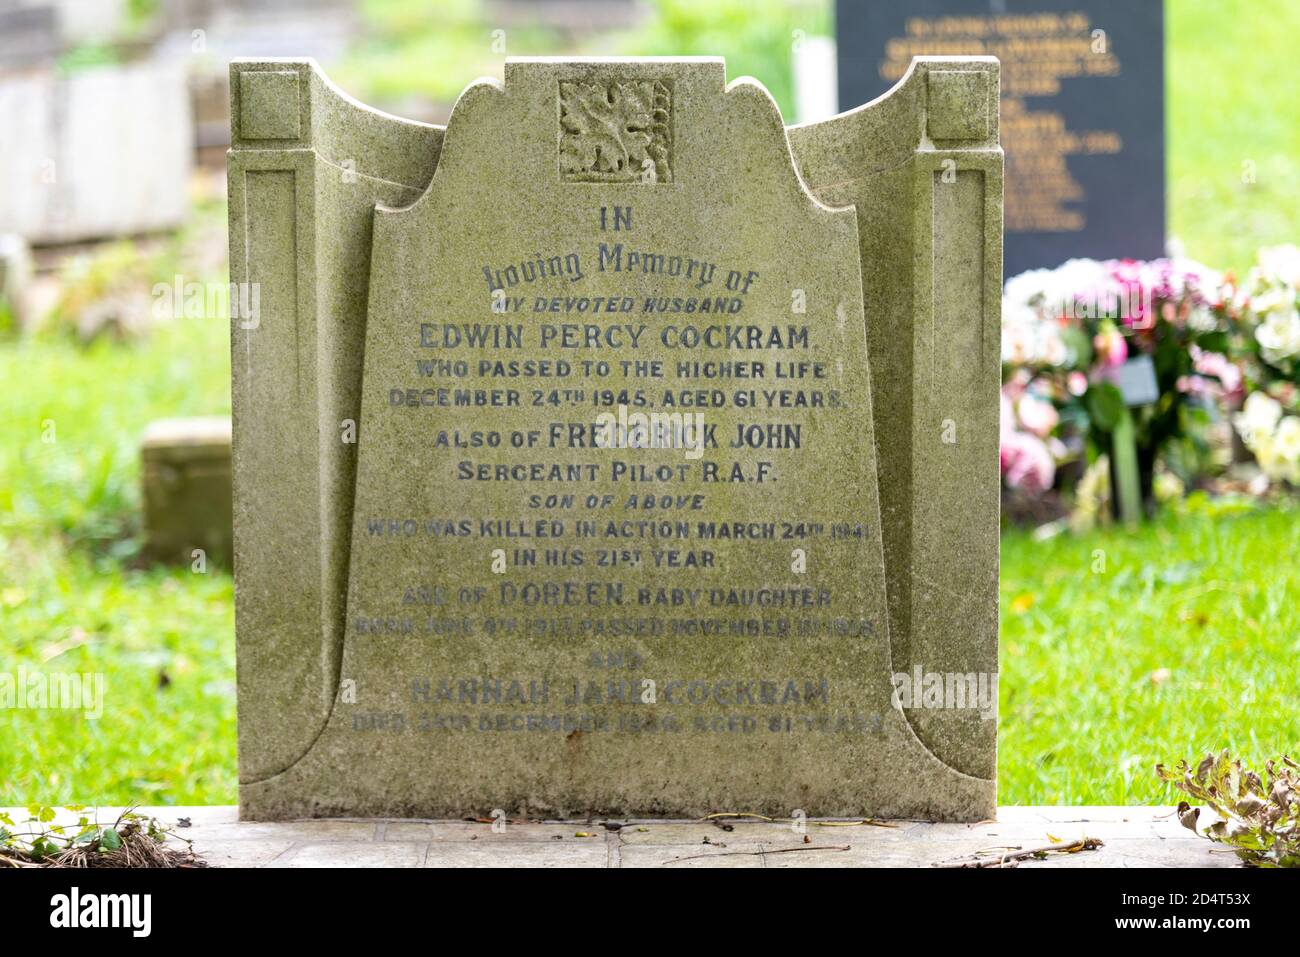 Headstone, gravestone on grave of Sergeant Frederick John Cockram, of 222 Sqn RAFVR, died 24 March 1941 aged 20, in Spitfire P7847 from Coltishall Stock Photo